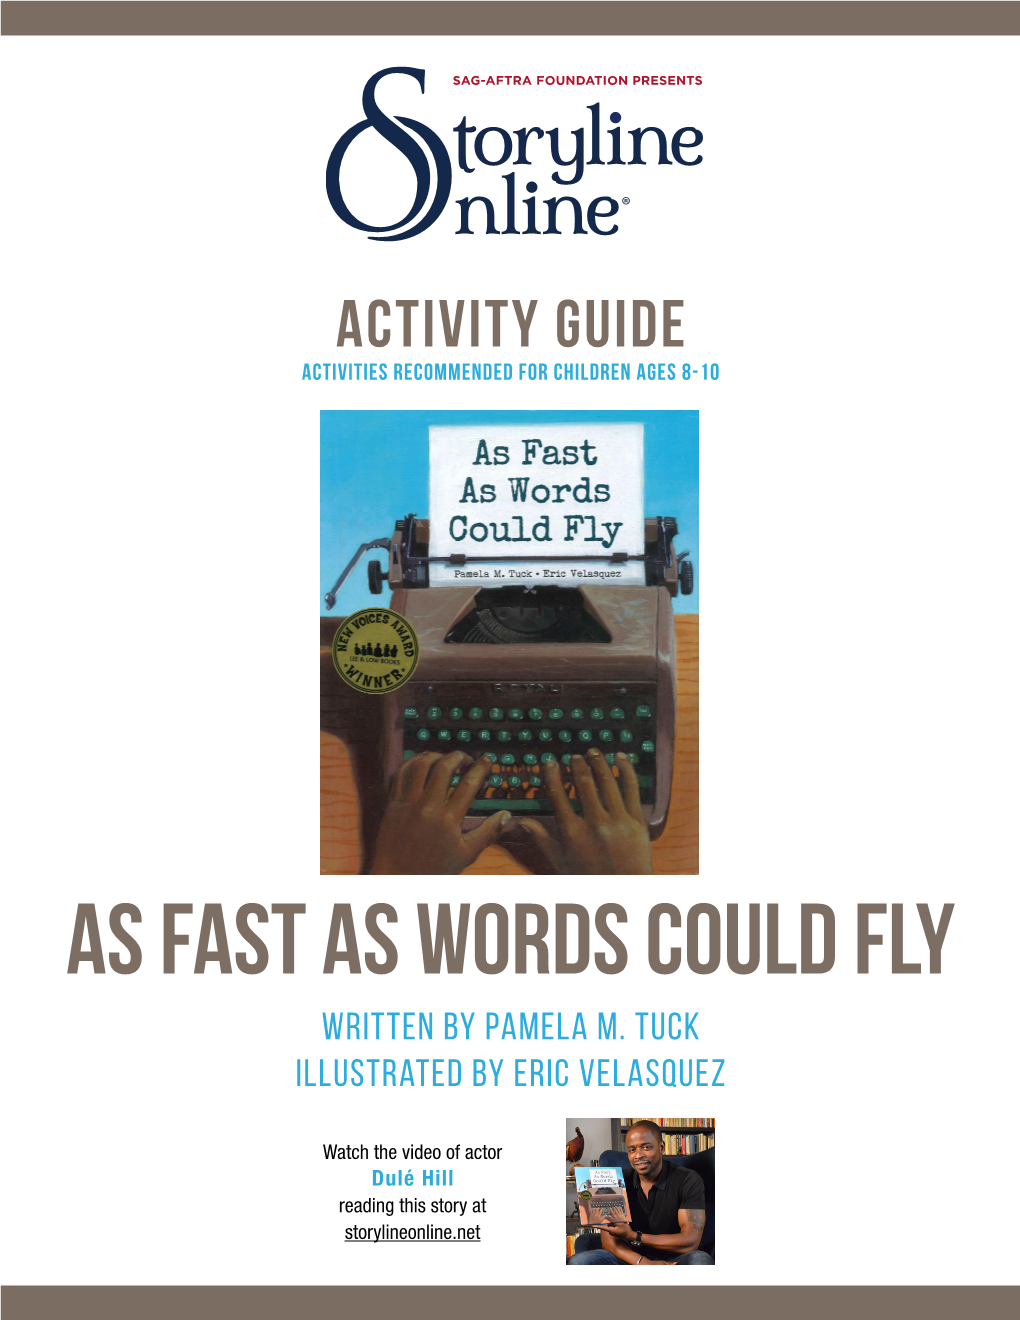 As Fast As Words Could Fly Written by Pamela M